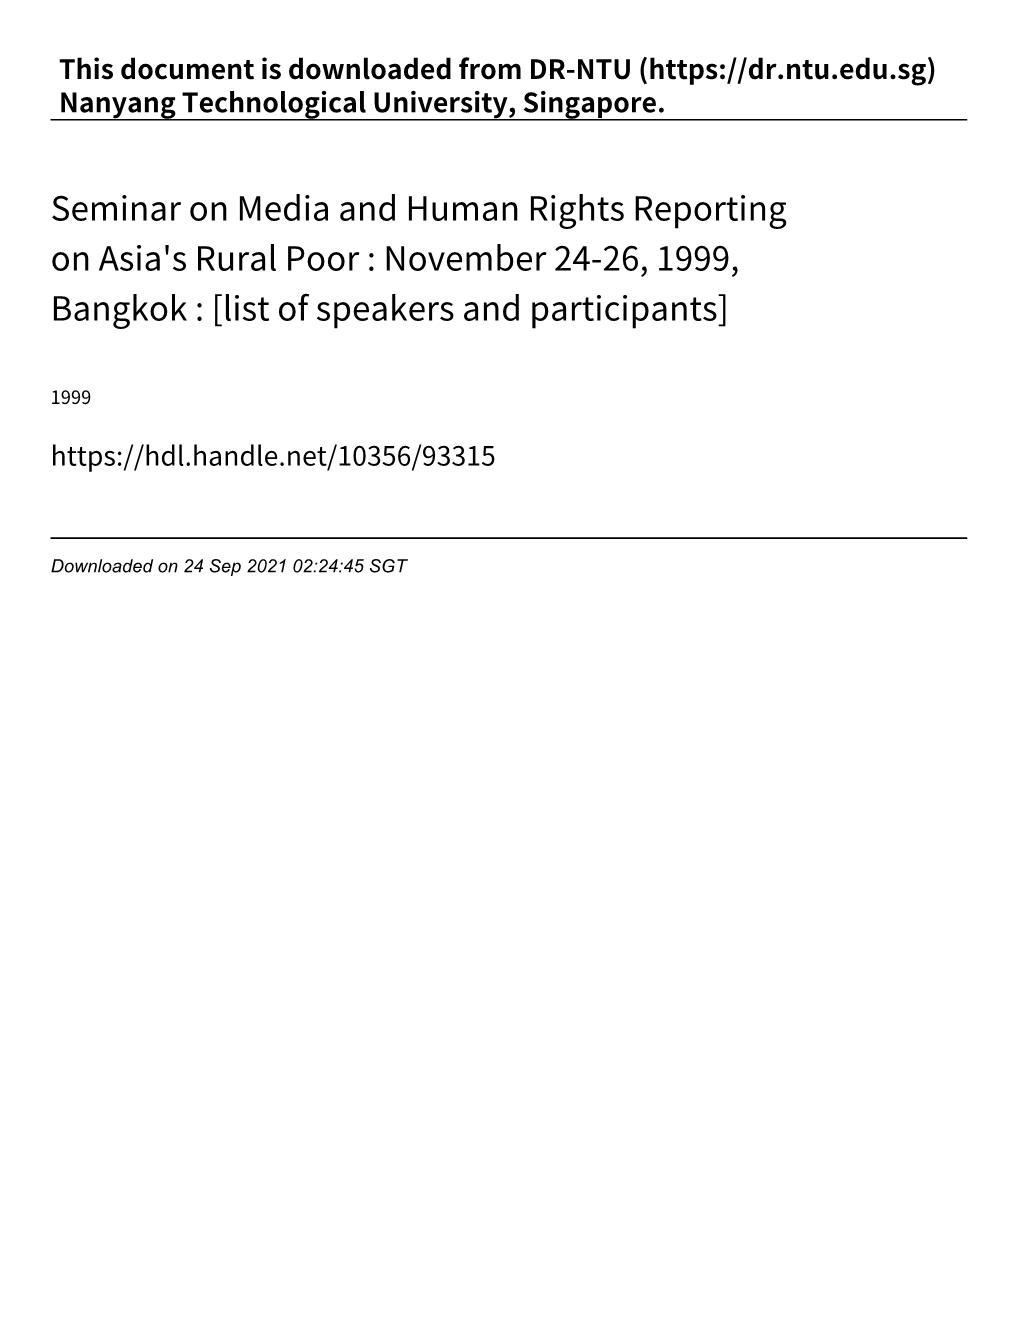 Seminar on Media and Human Rights Reporting on Asia's Rural Poor : November 24‑26, 1999, Bangkok : [List of Speakers and Participants]